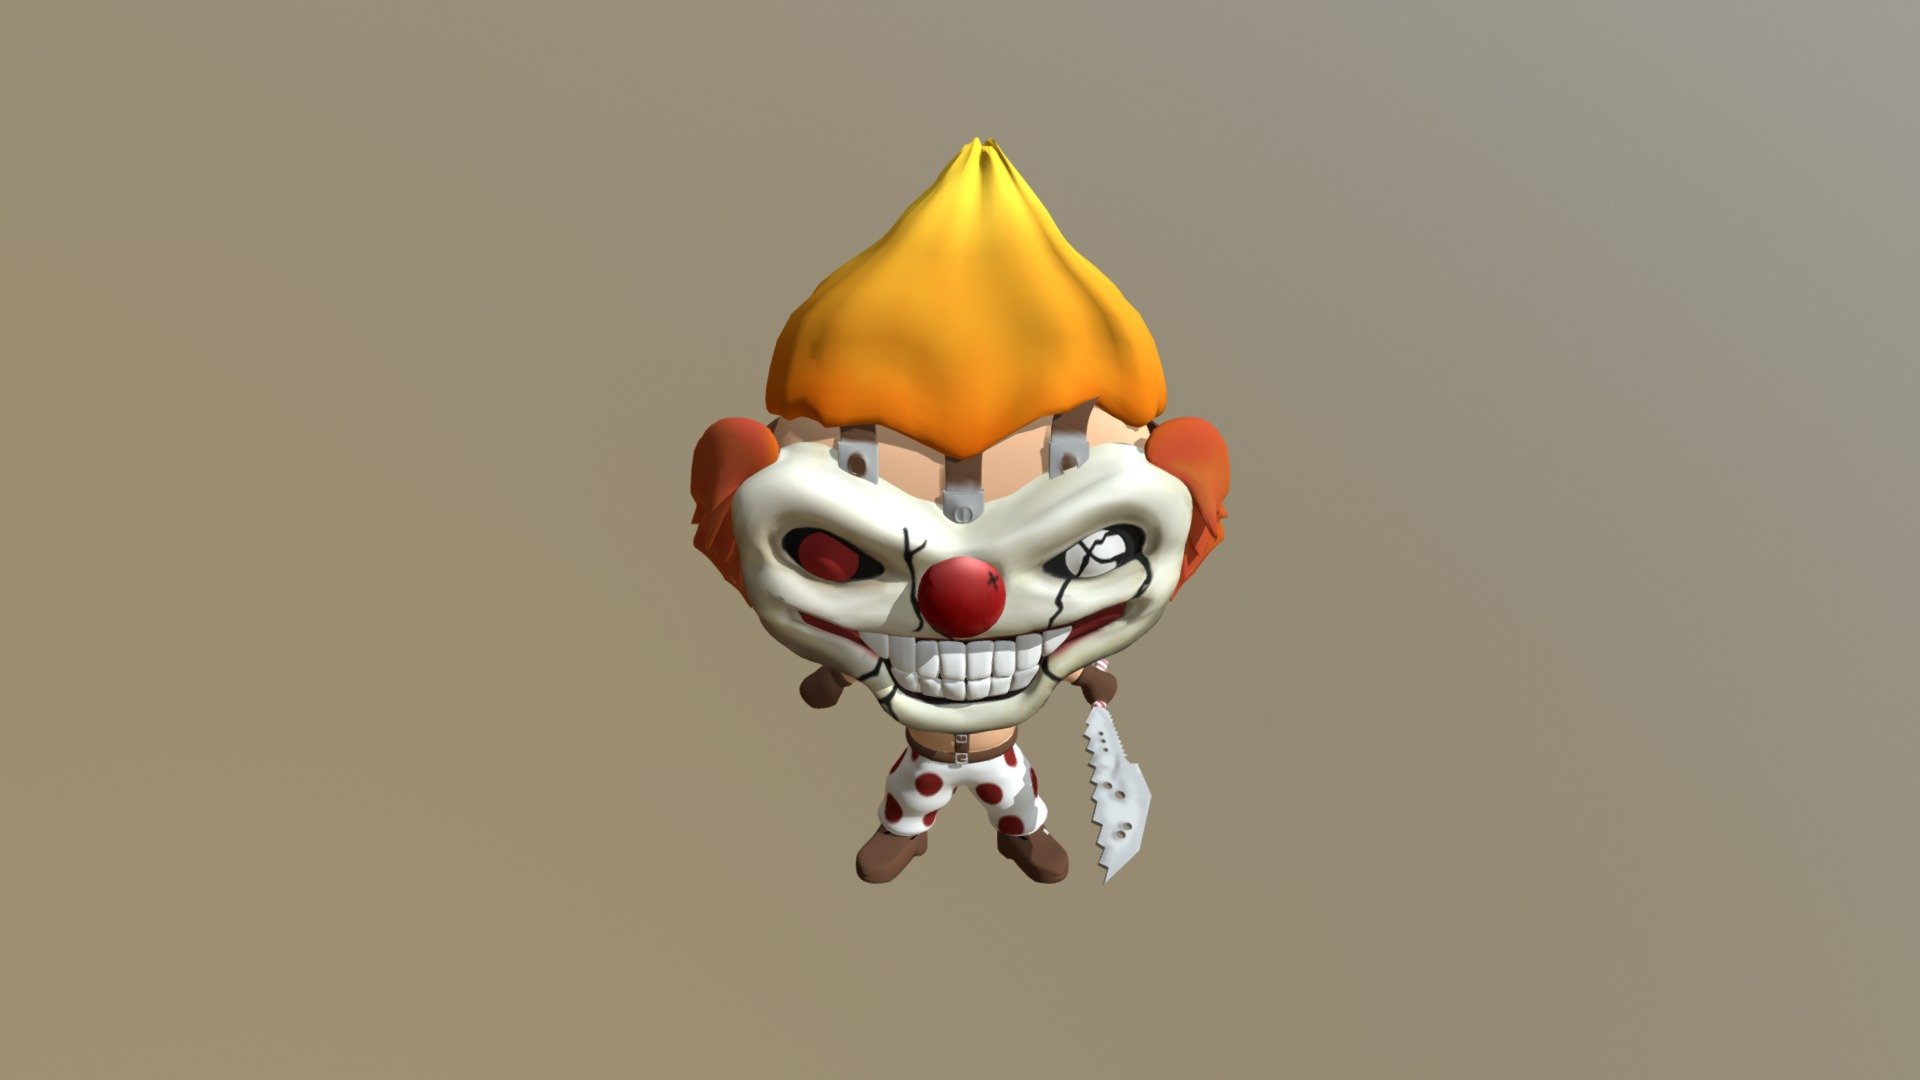 Published by 3ds Max
Texturizado en photoshop
Version Funko Pop 
Twisted Metal - sweet tooth - 3D model by GuauAgencia 3d model